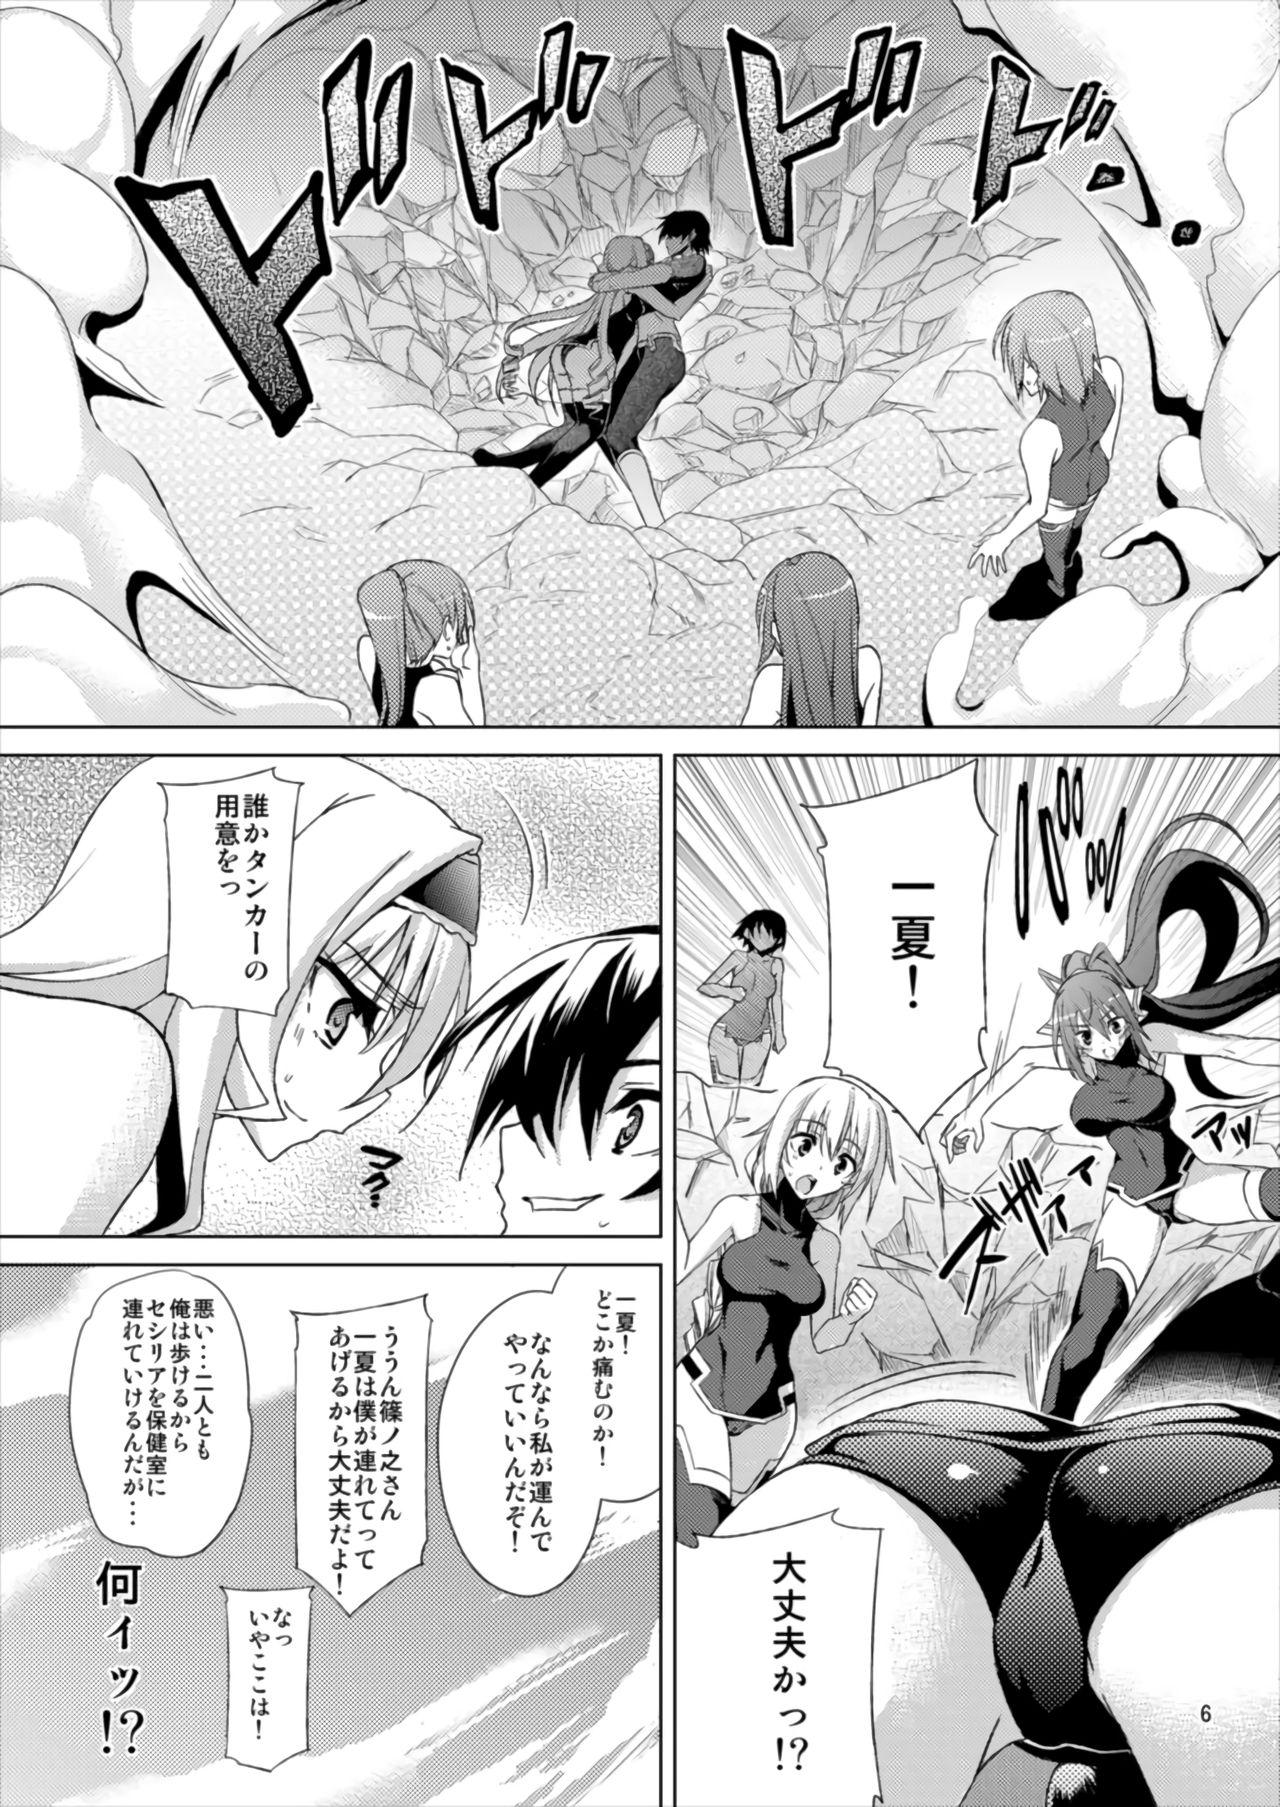 Compilation AFTER DREAM - Infinite stratos Free Amature Porn - Page 6